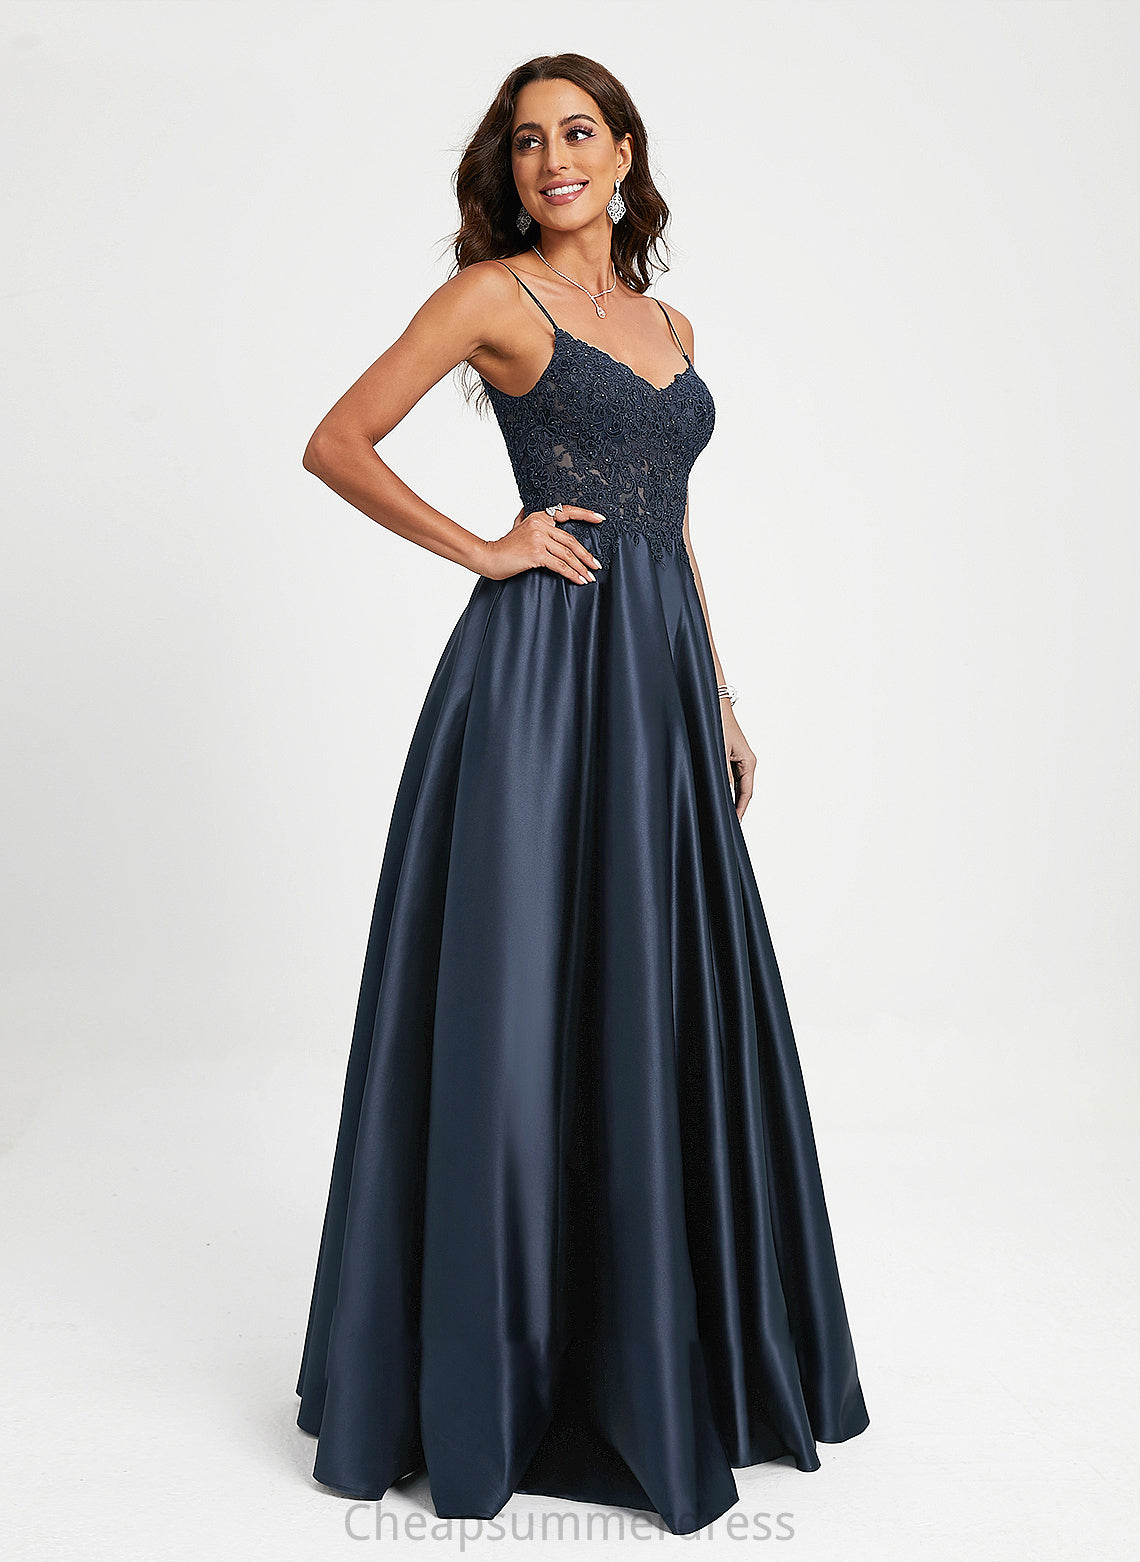 V-neck Satin Mariela Lace Prom Dresses With Floor-Length Sequins A-Line